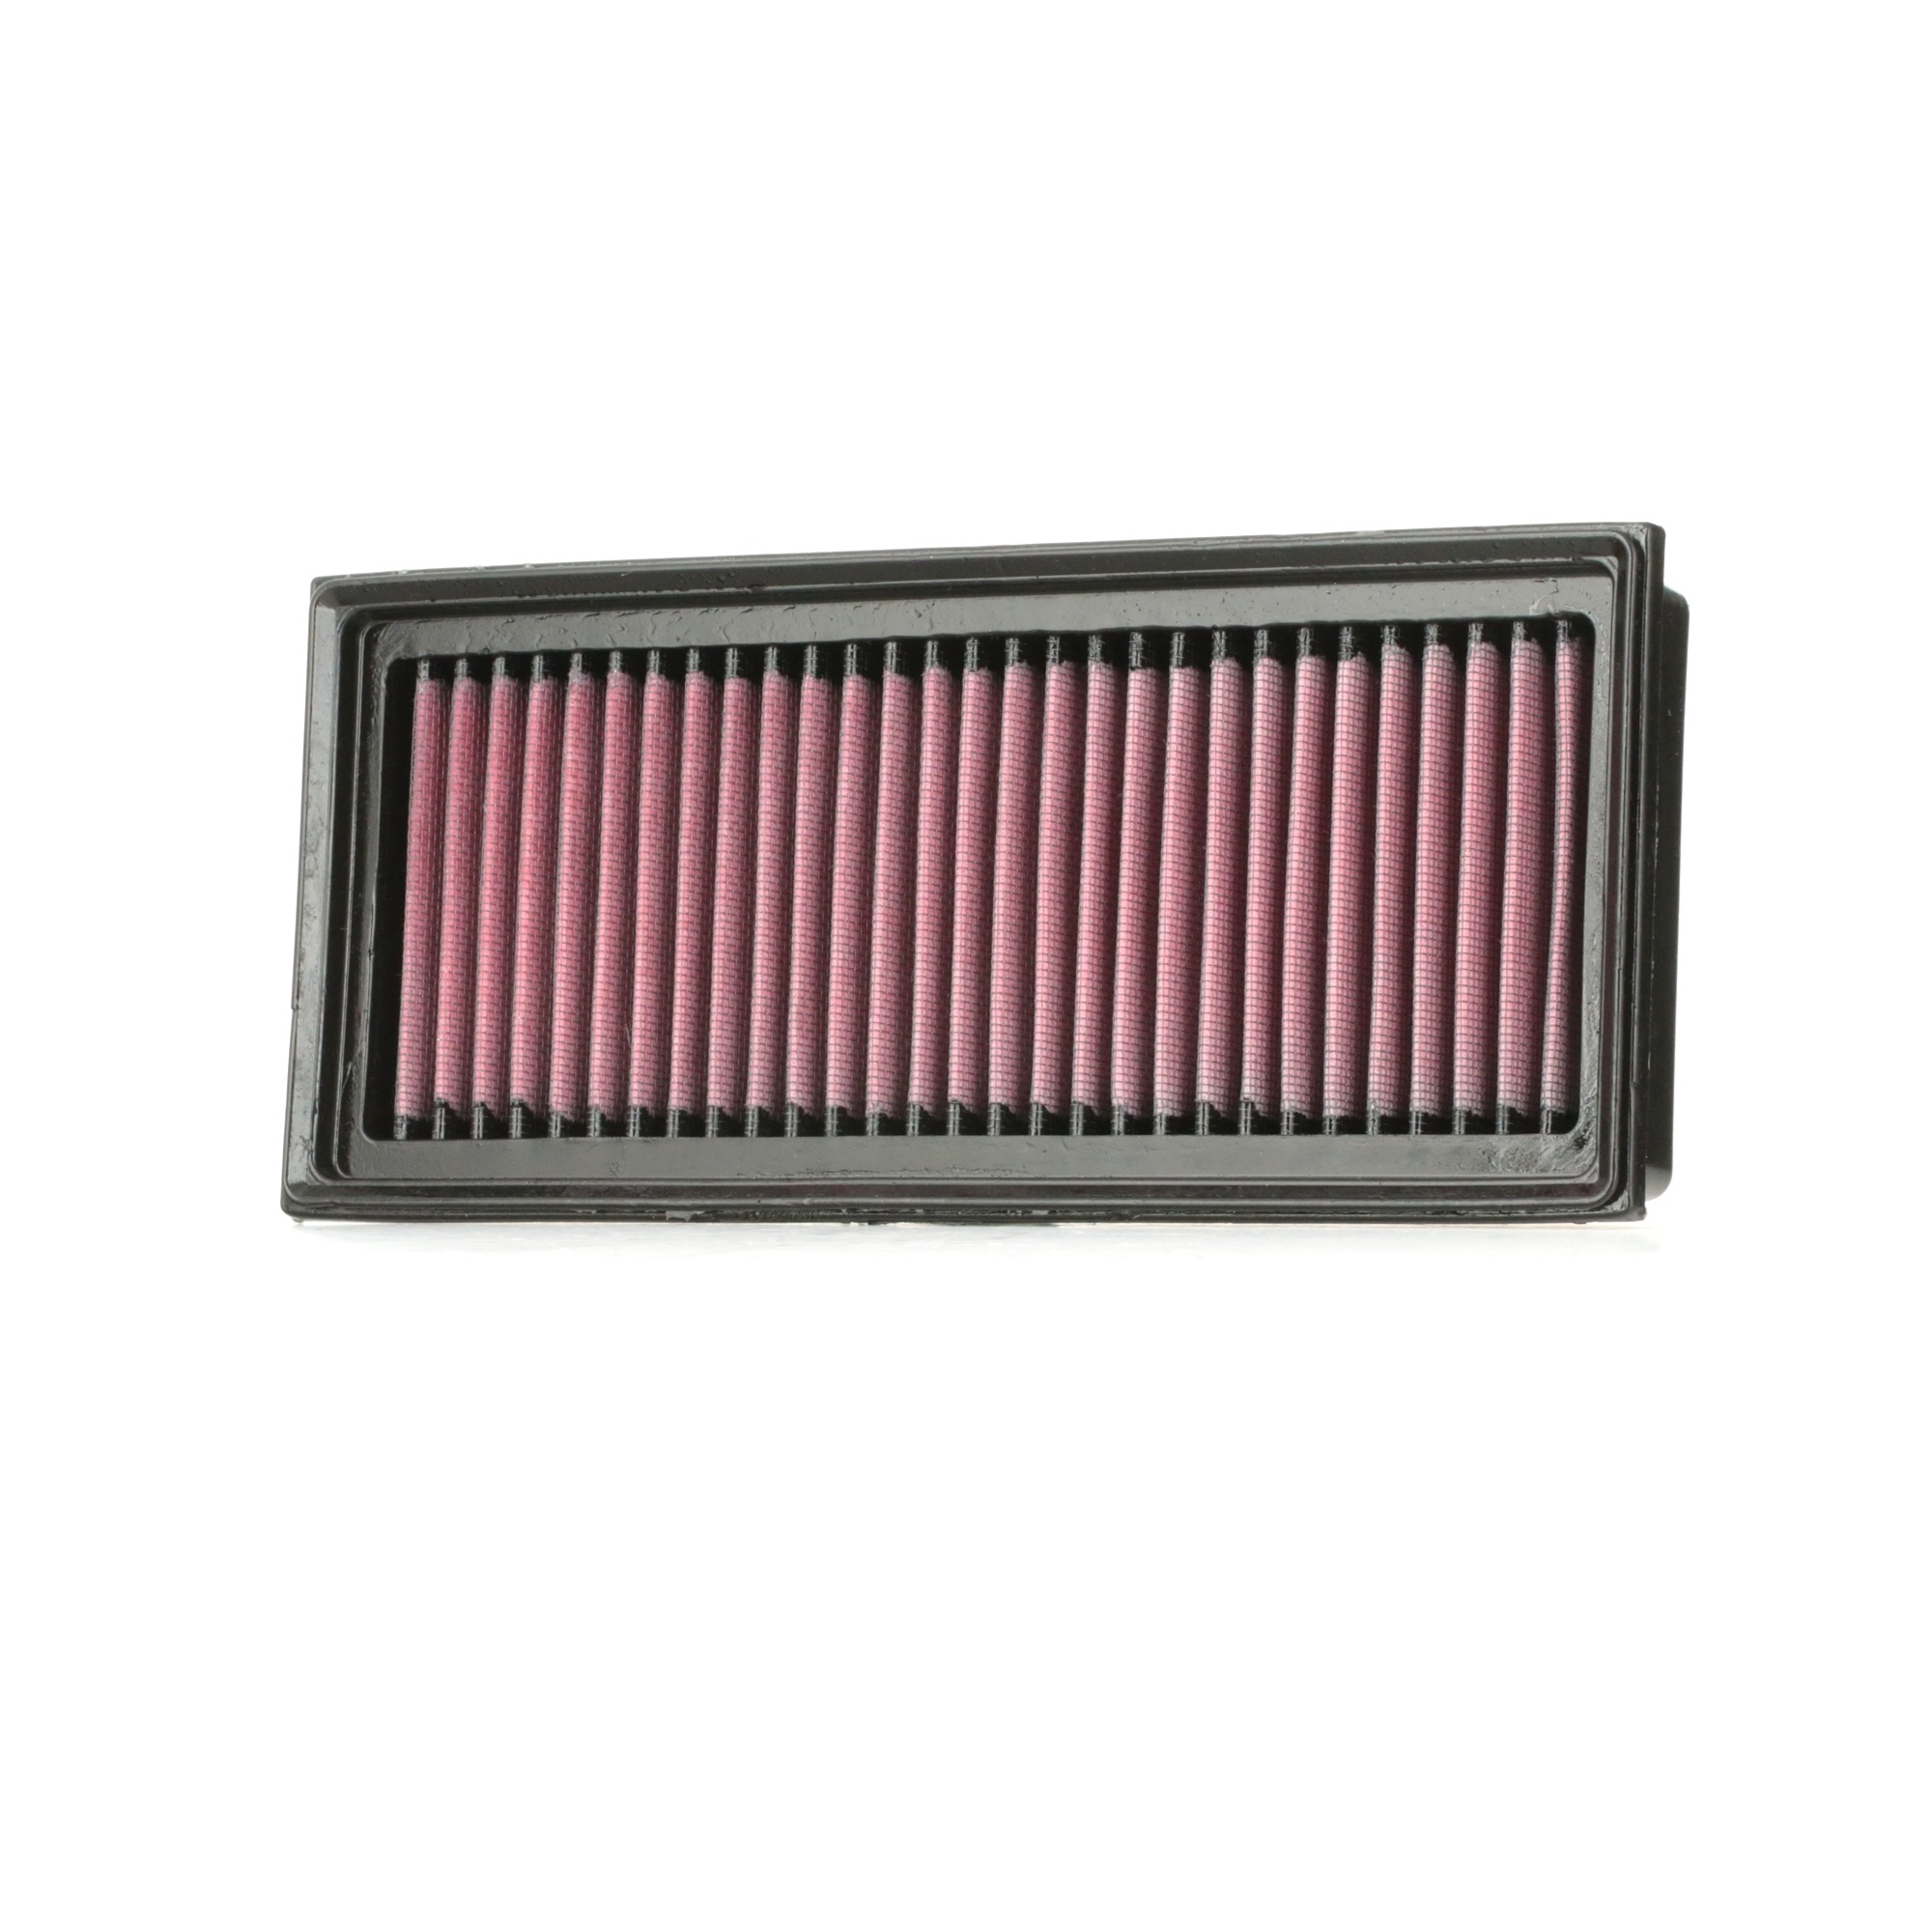 K&N Filters 33-3072 Air filter 44mm, 129mm, 287mm, Square, Long-life Filter